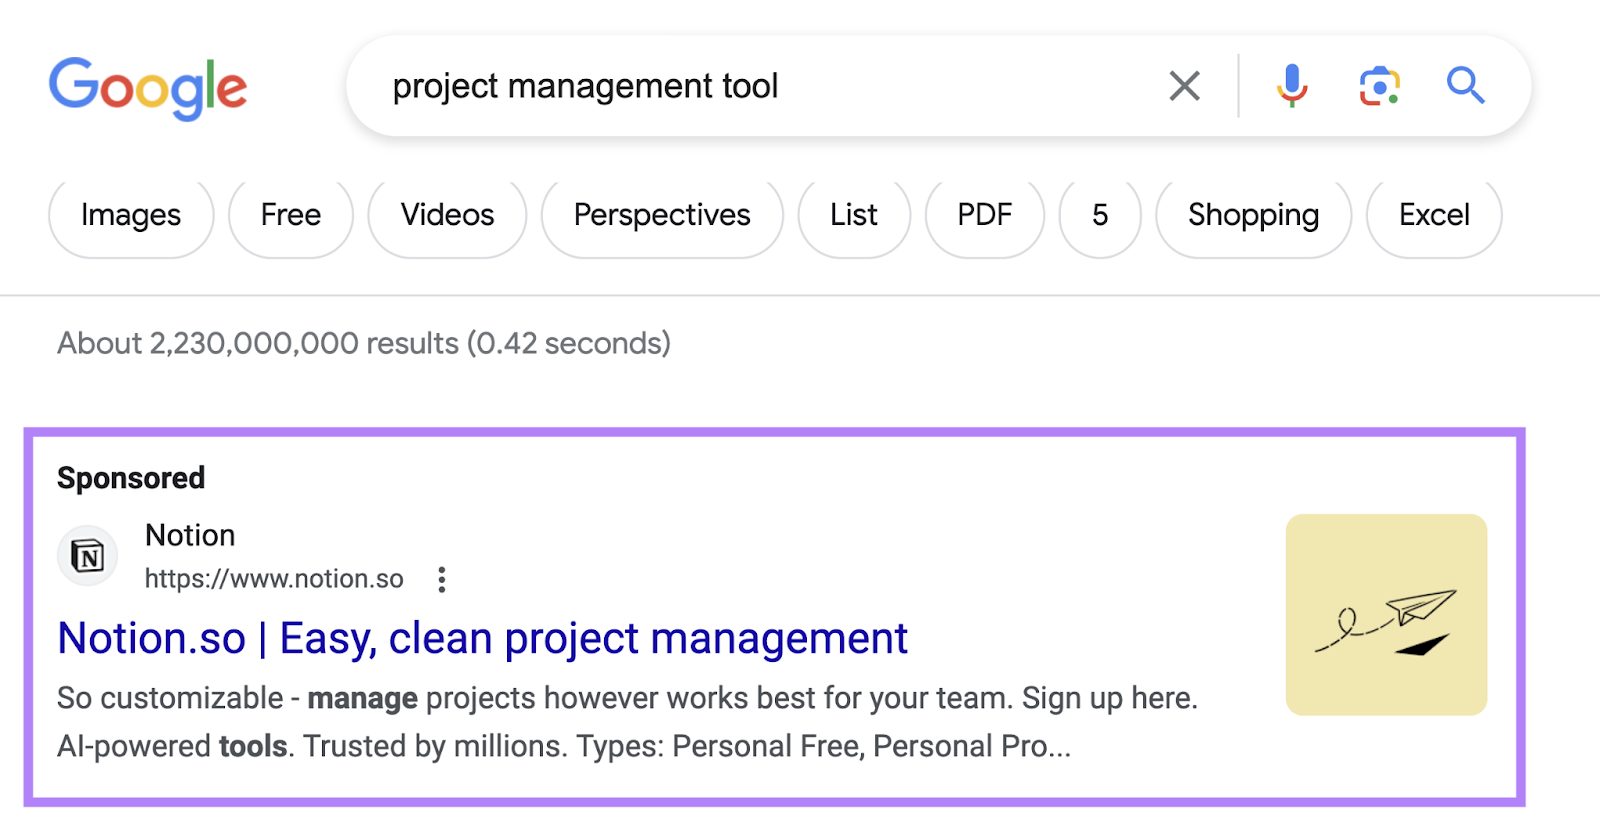 A search ad on Google's SERP for "project management tool" query